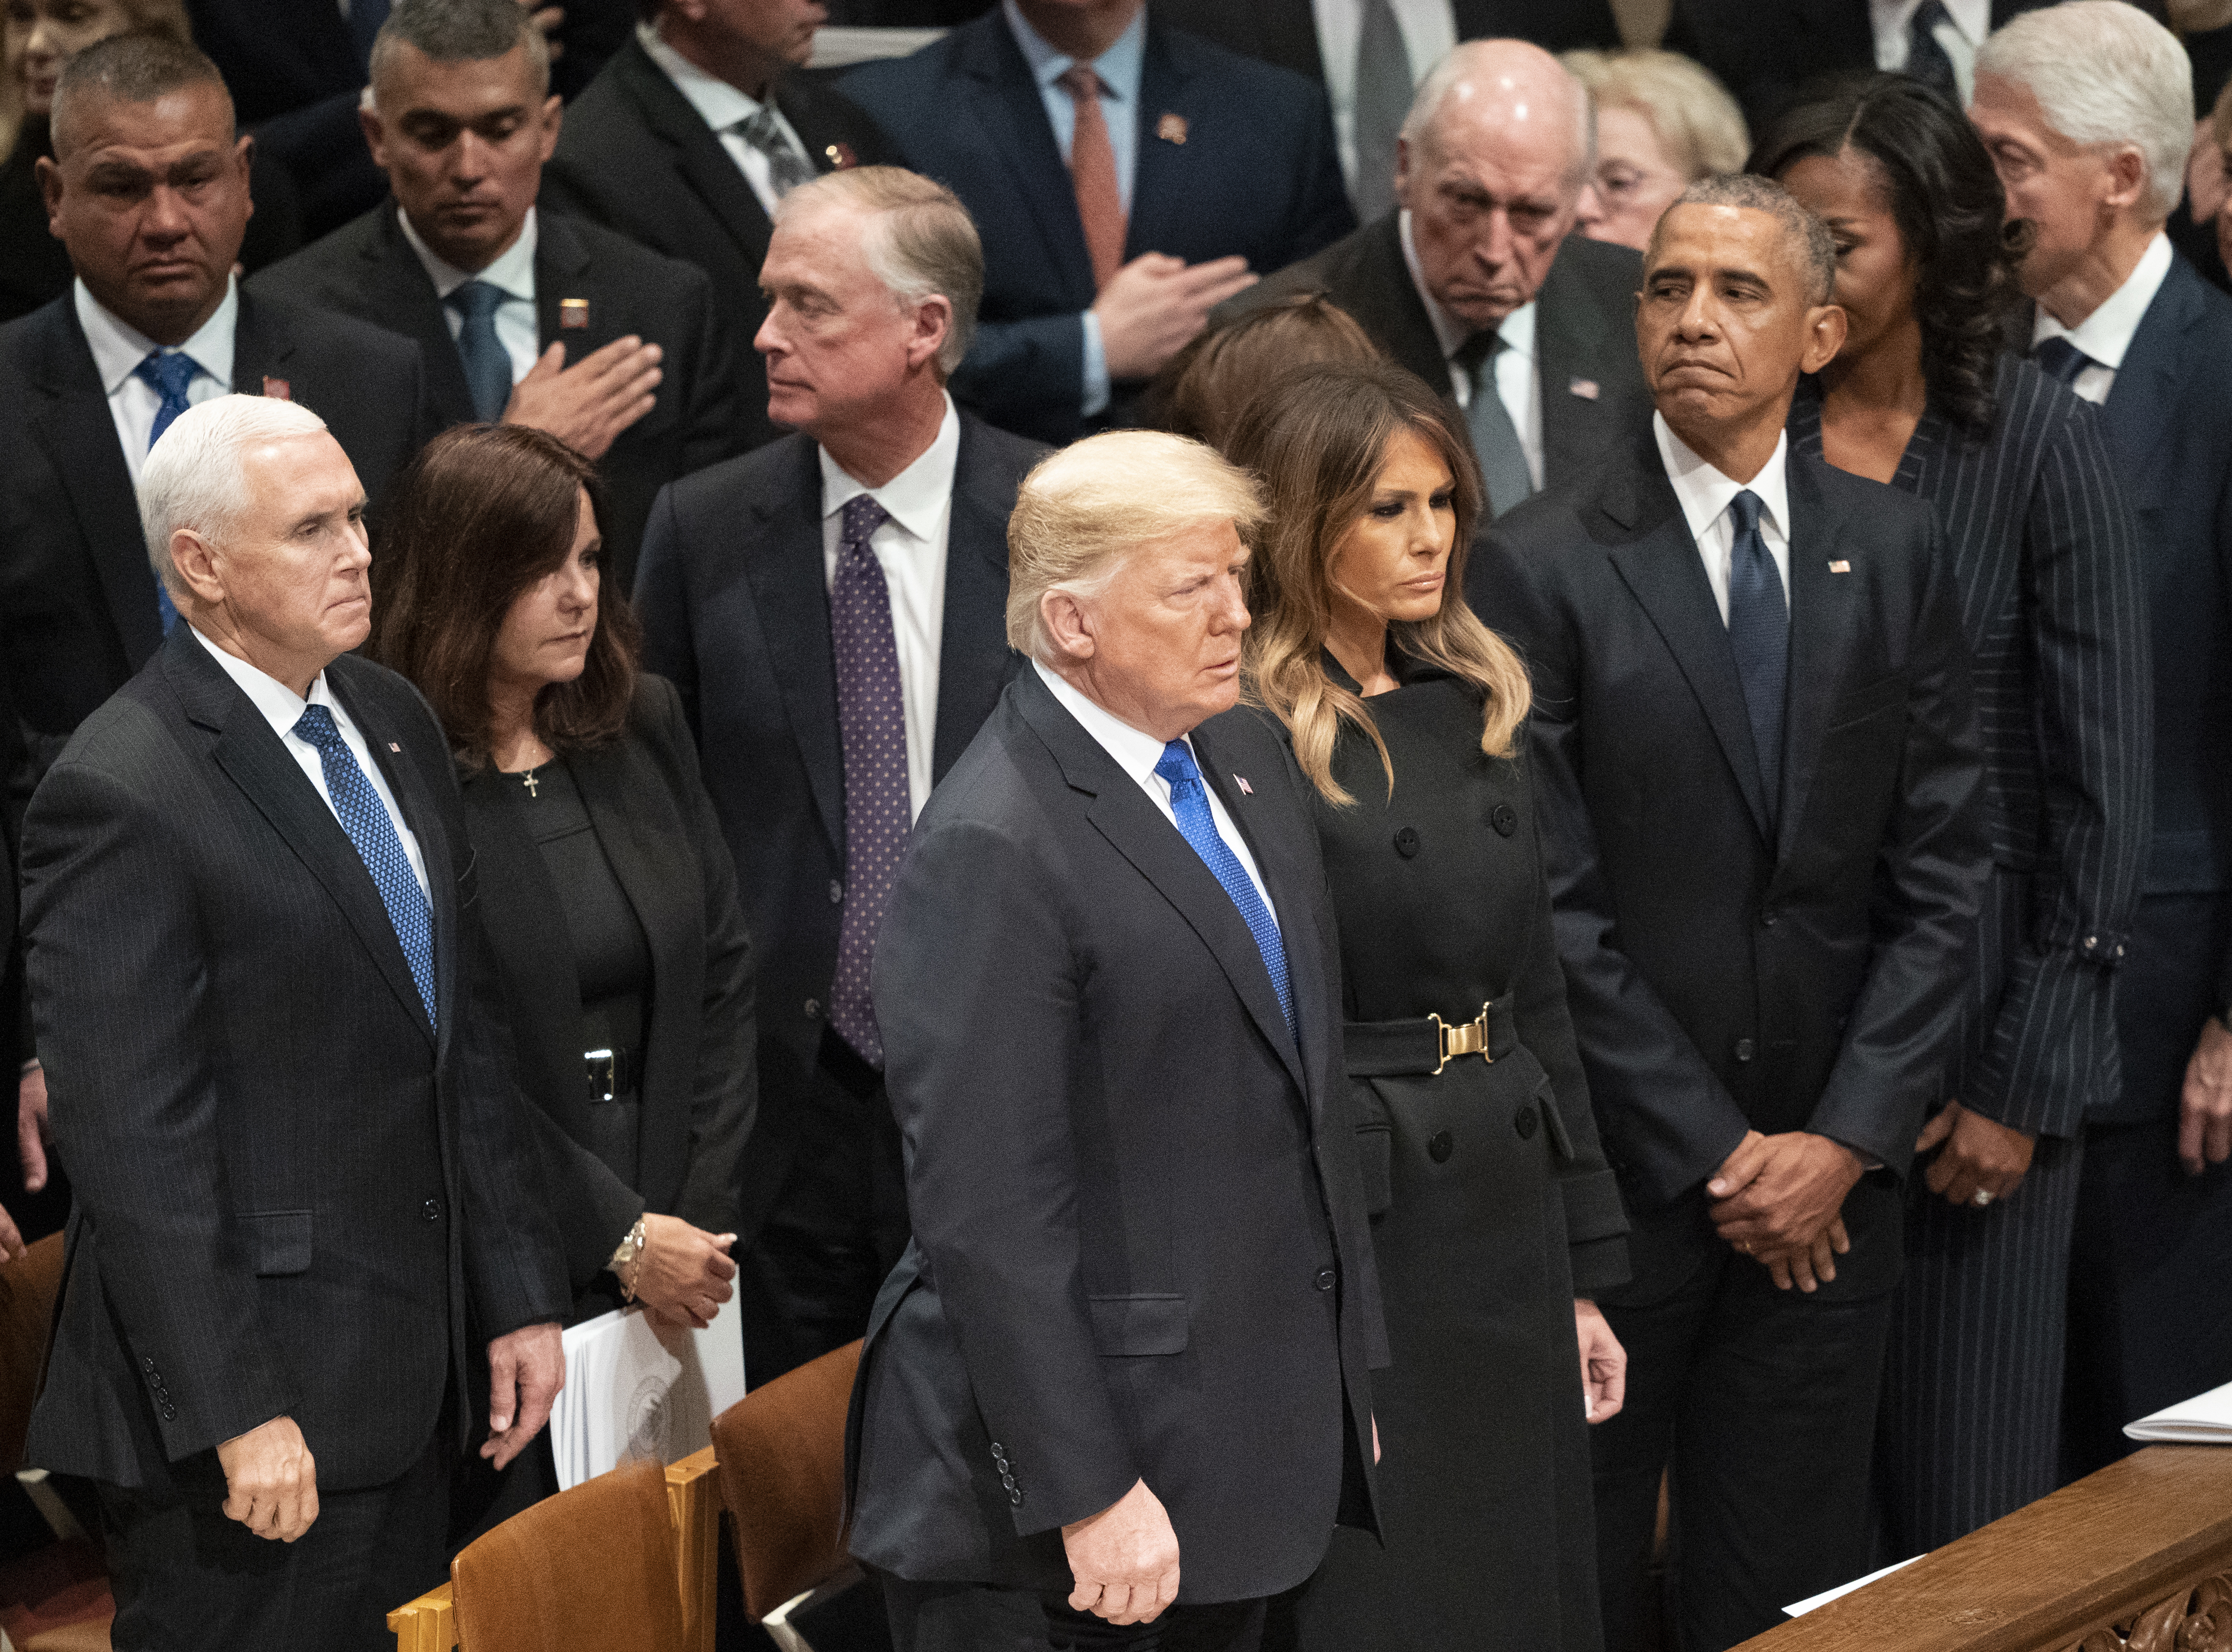 President Donald Trump, first lady Melania Trump, former President Barack Obama, Michelle Obama, former President Bill Clinton, stand at the end of a State Funeral for former President George HW Bush